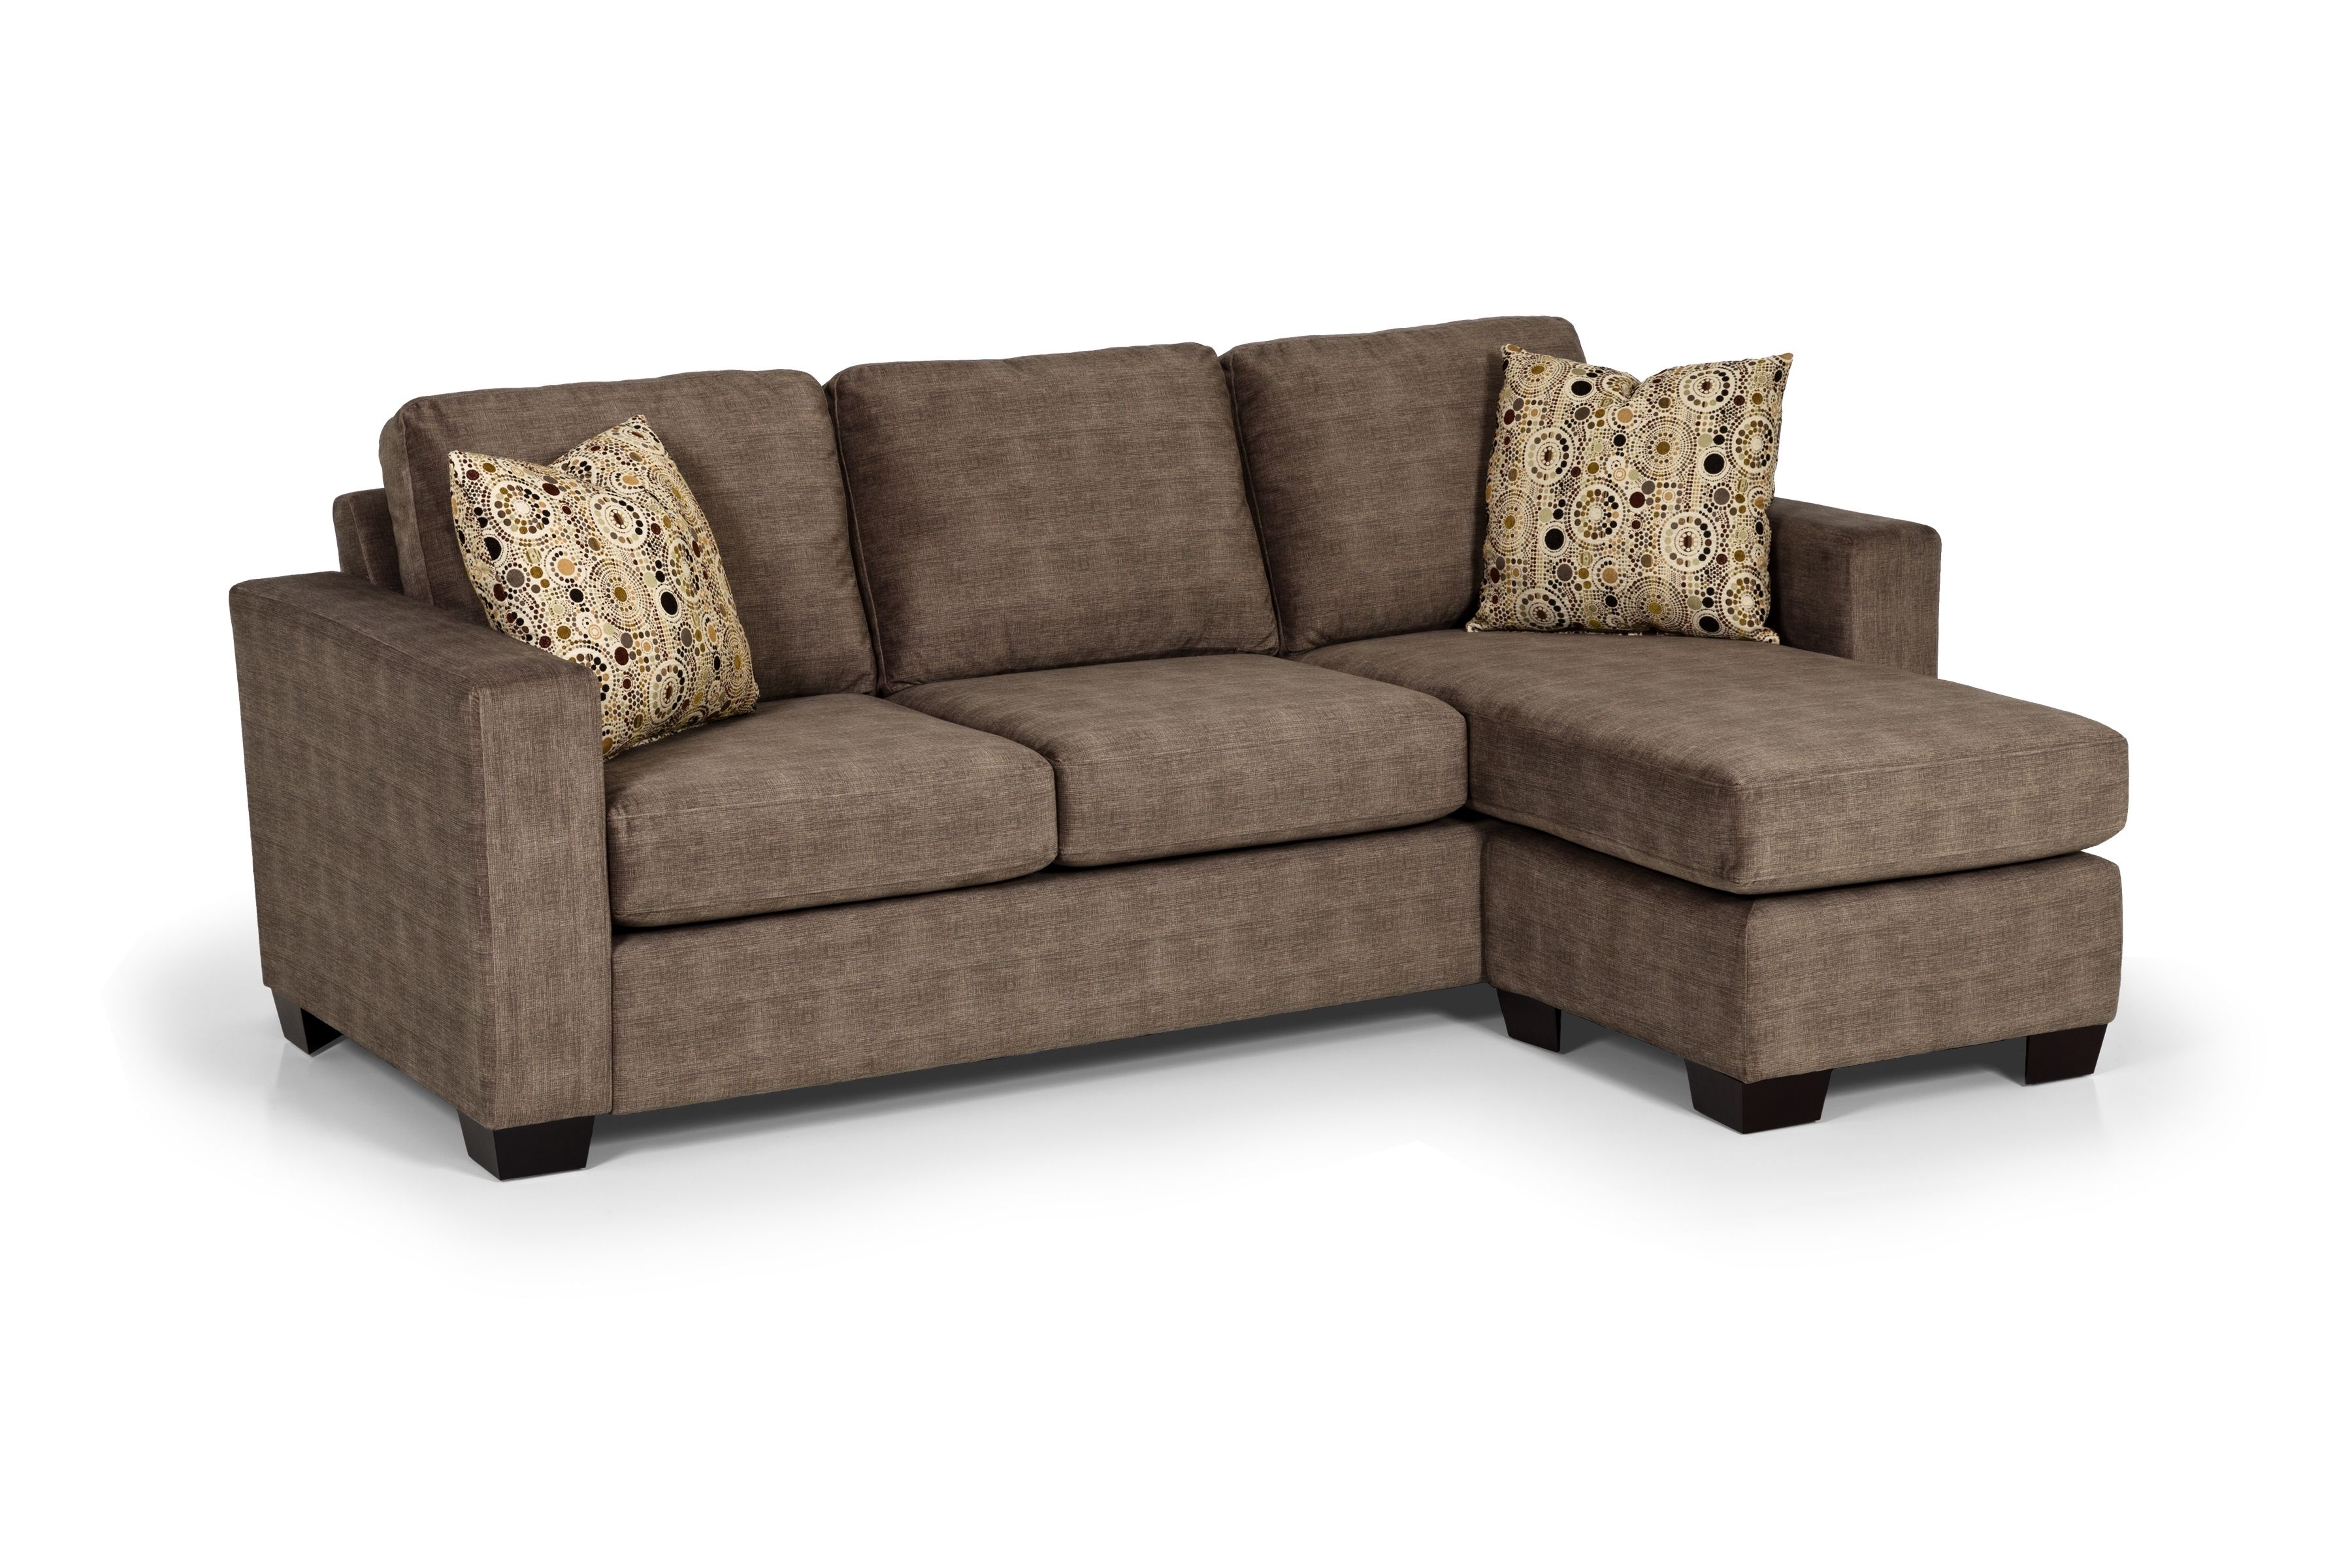 Sectional Sofa Design: Cheap Sectional Sofas Furniture Design Stock With Regard To Sectional Sofas In Stock (Photo 10 of 10)